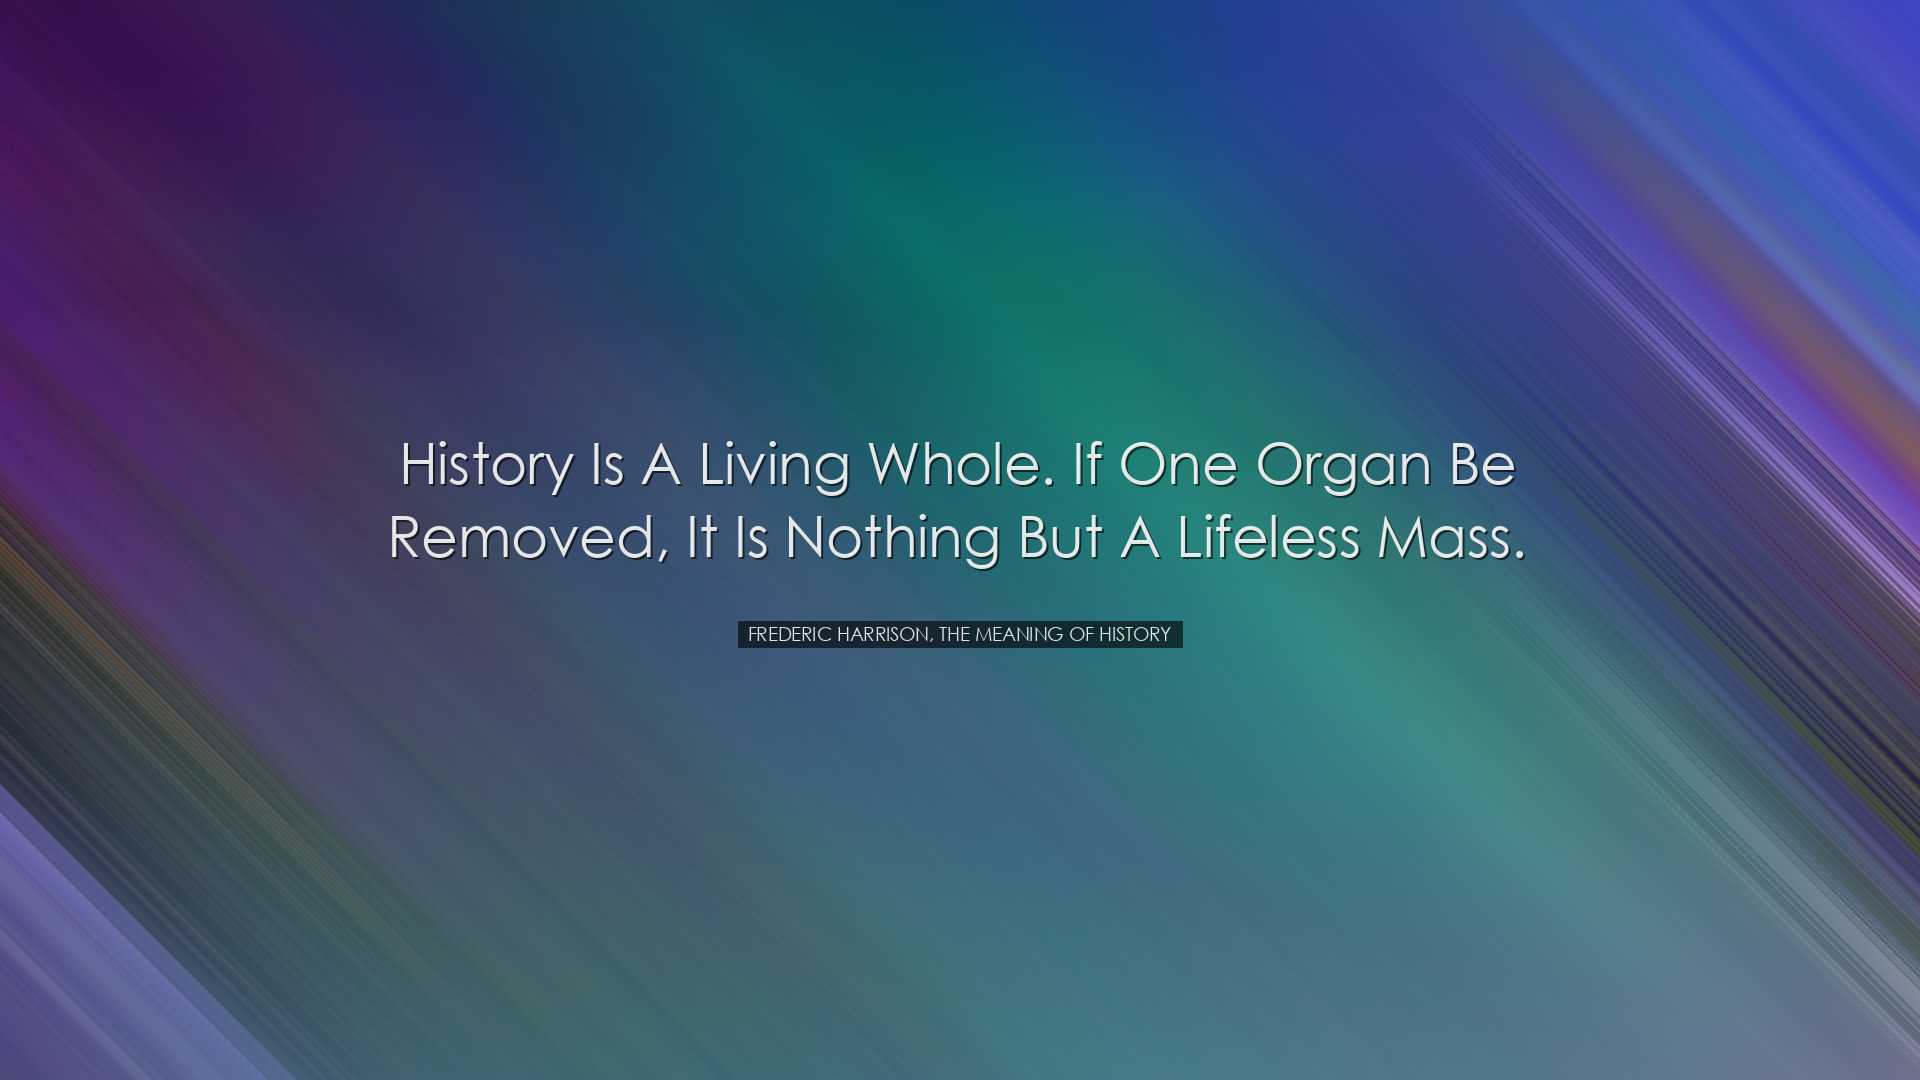 History is a living whole. If one organ be removed, it is nothing